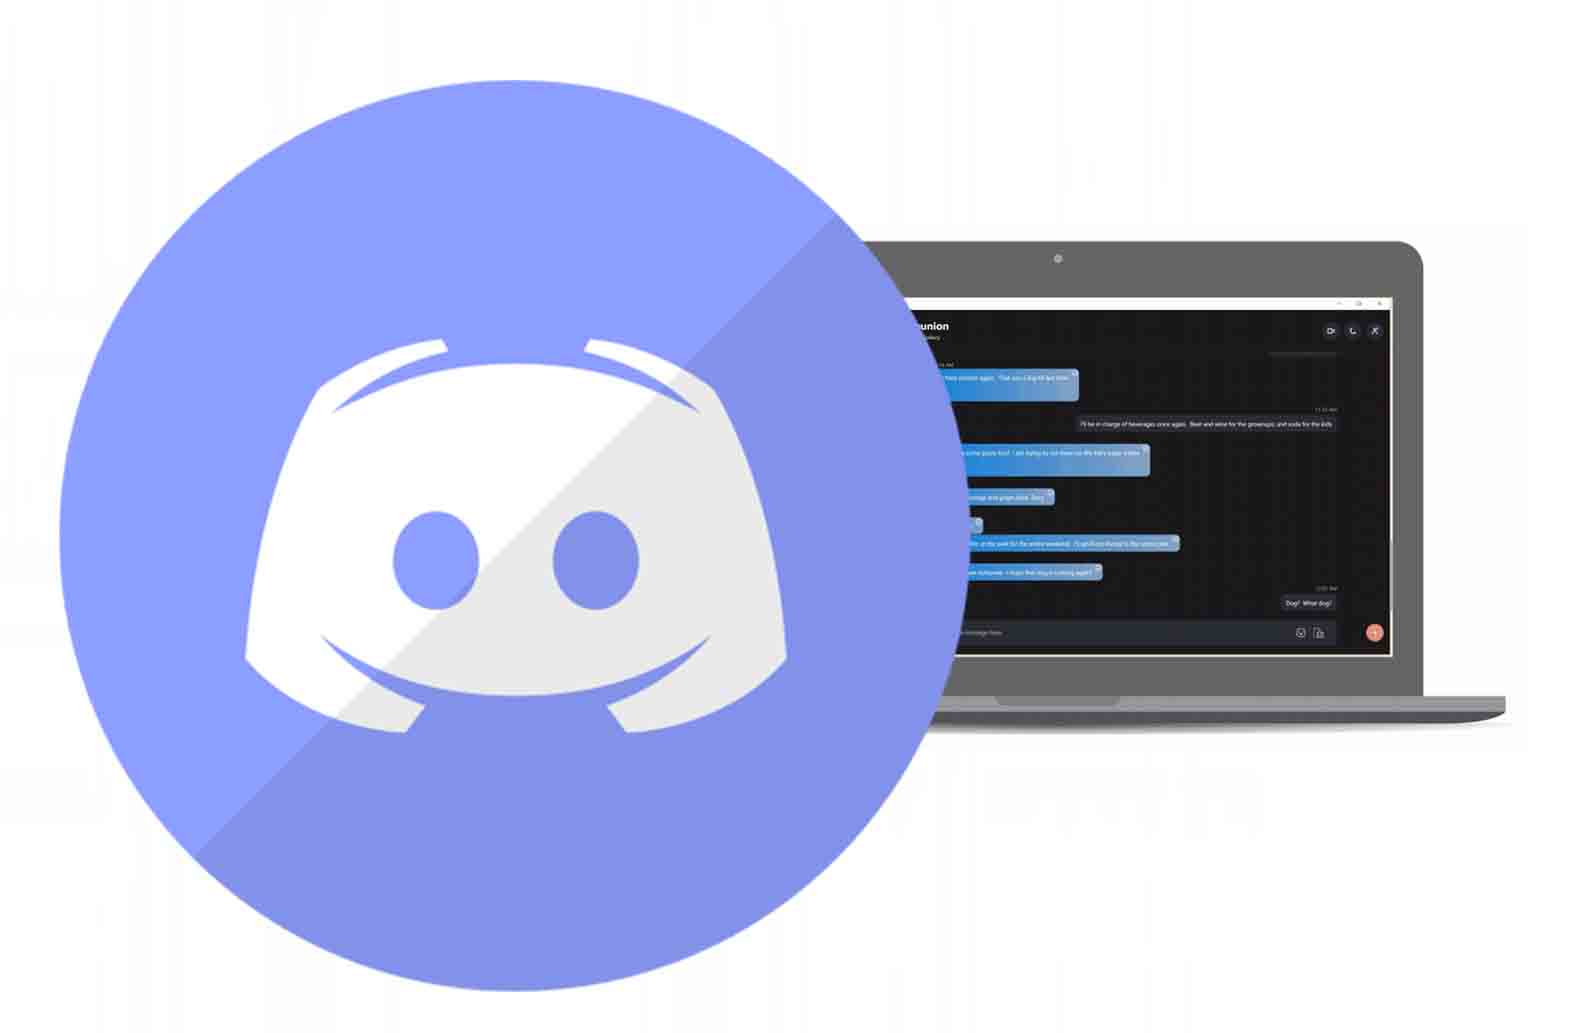 browser discord